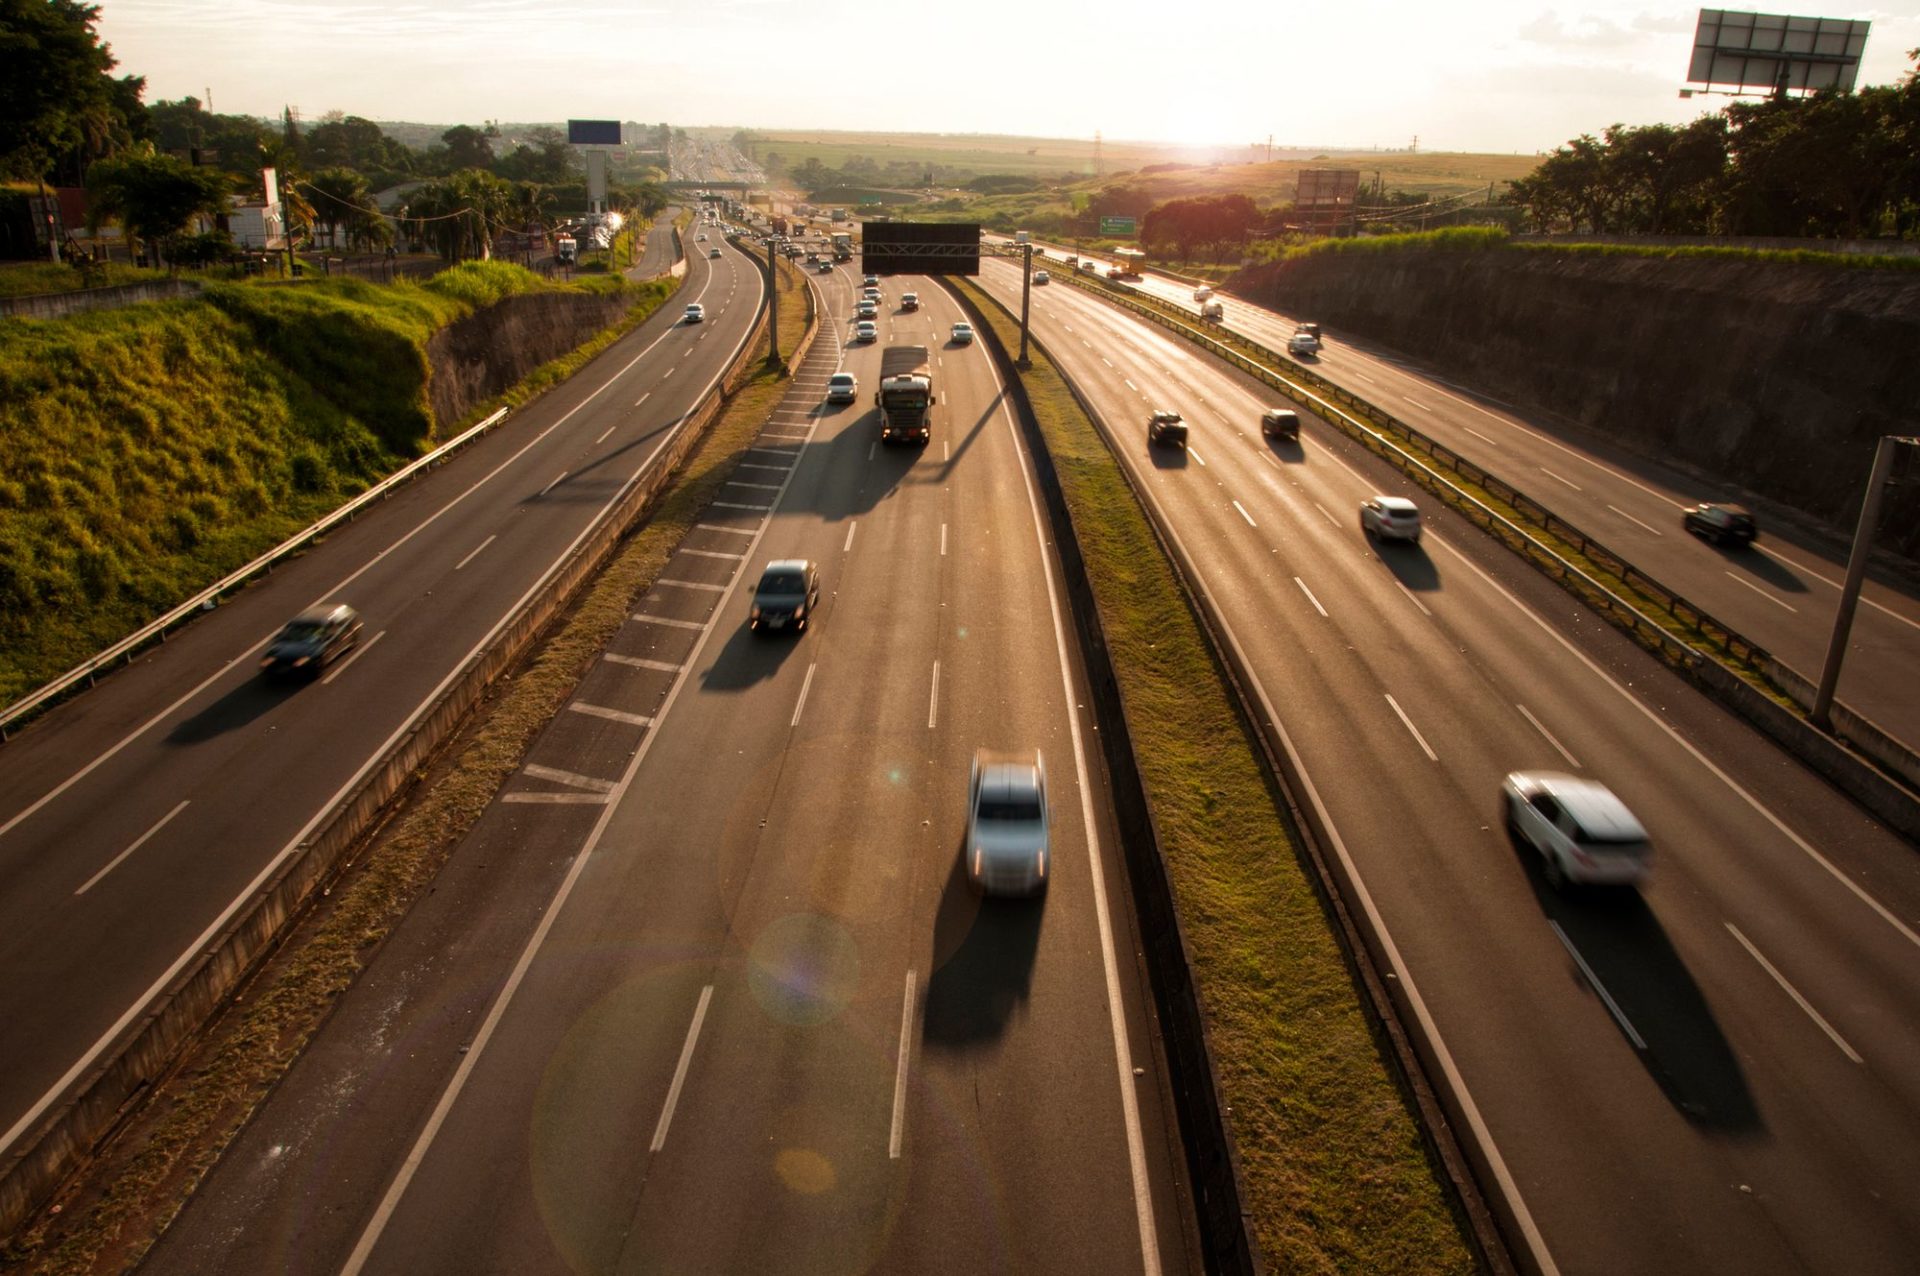 Road to Equity Blog by Zully Juarez Just Solutions Featured Image of cars on highway